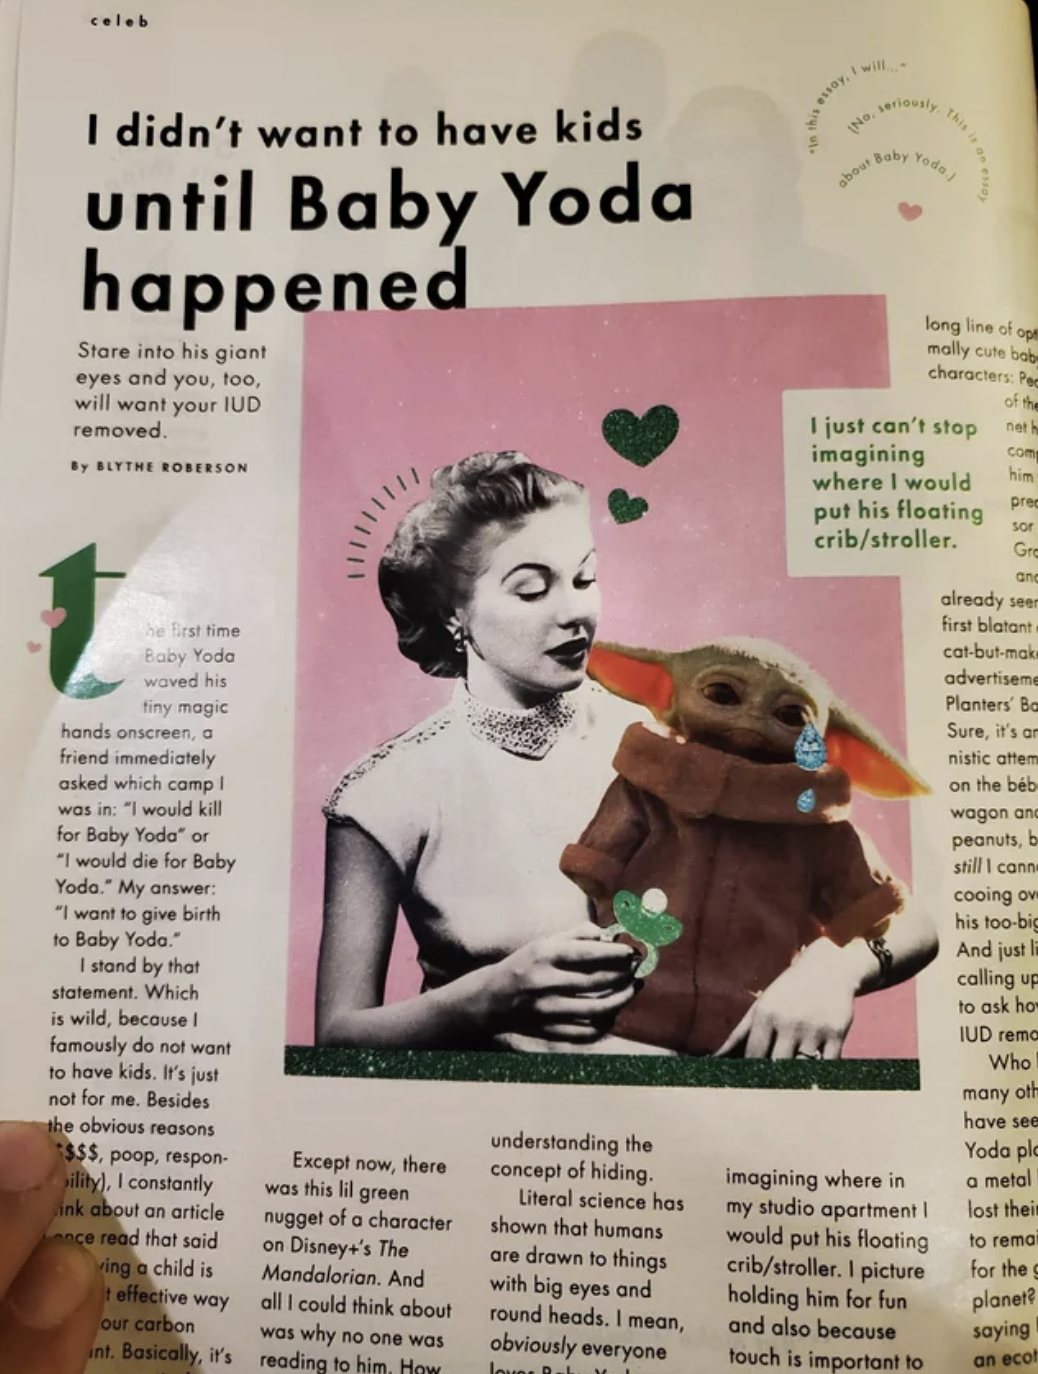 poster - I didn't want to have kids until Baby Yoda happened Store into his giant eyes and you, too, will want your Iud removed Key Yode waved his hands anacreen friend immediately asked which campi was in would kill for Baby Yoda or "I would die for Baby